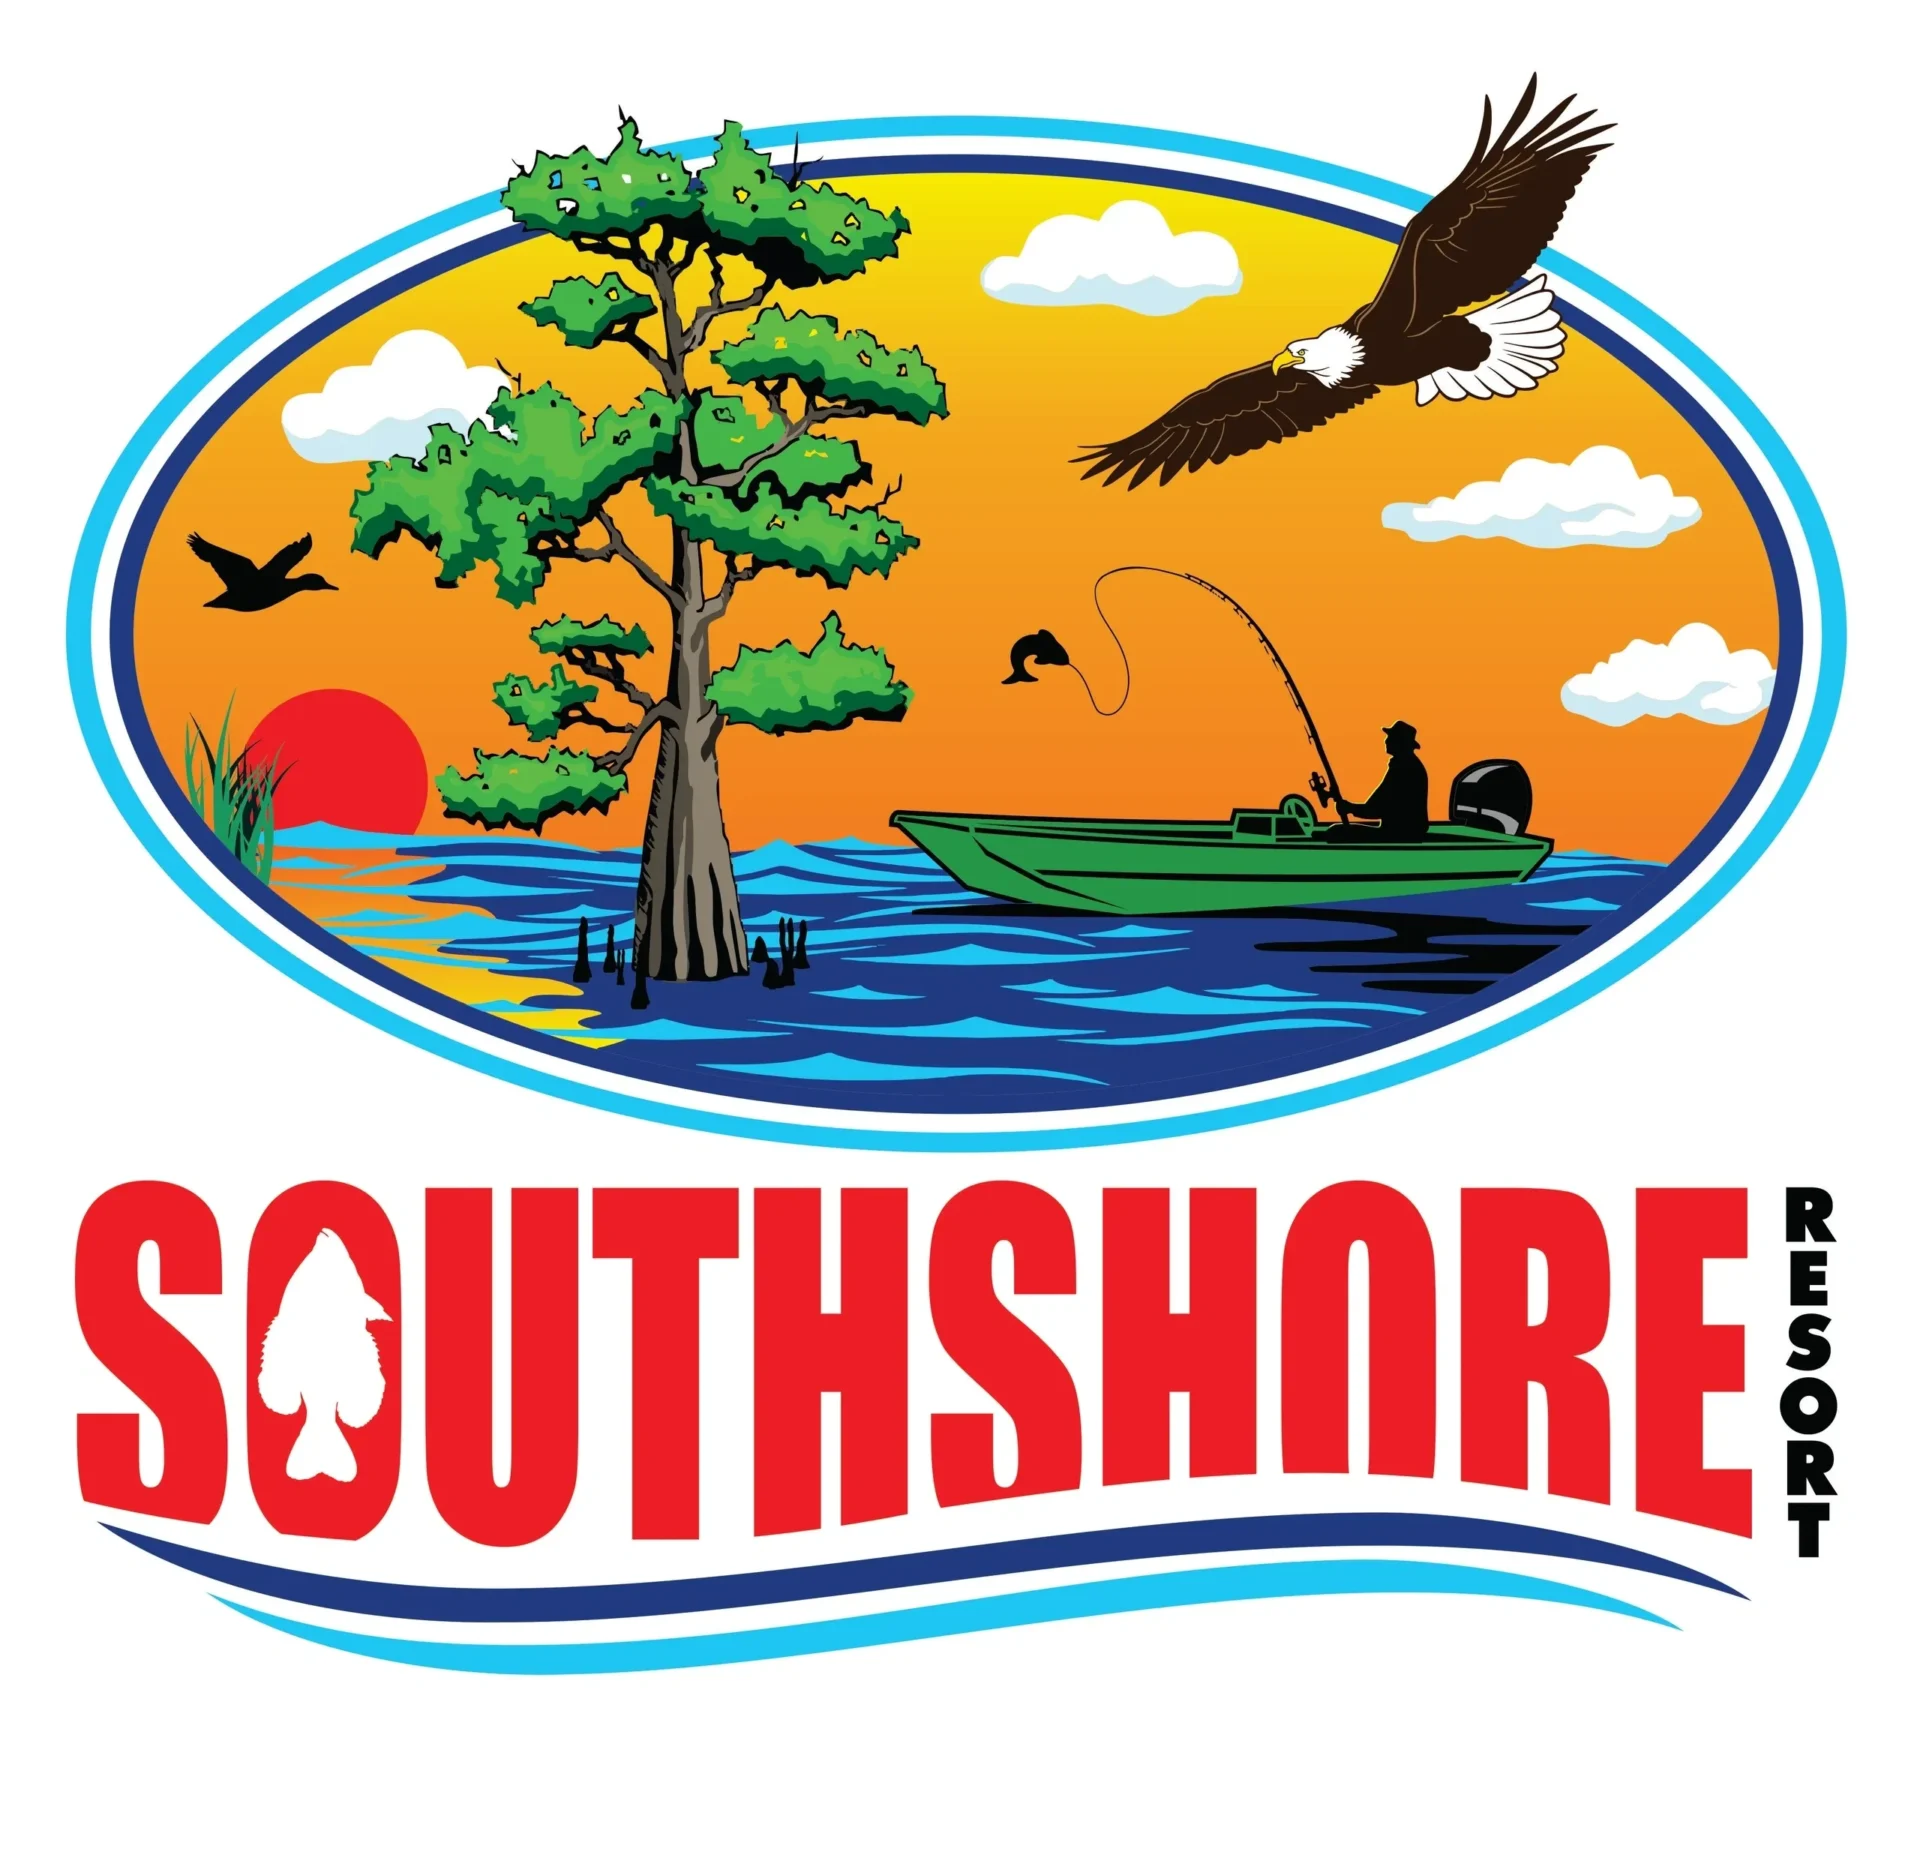 A logo of the southshore resort.